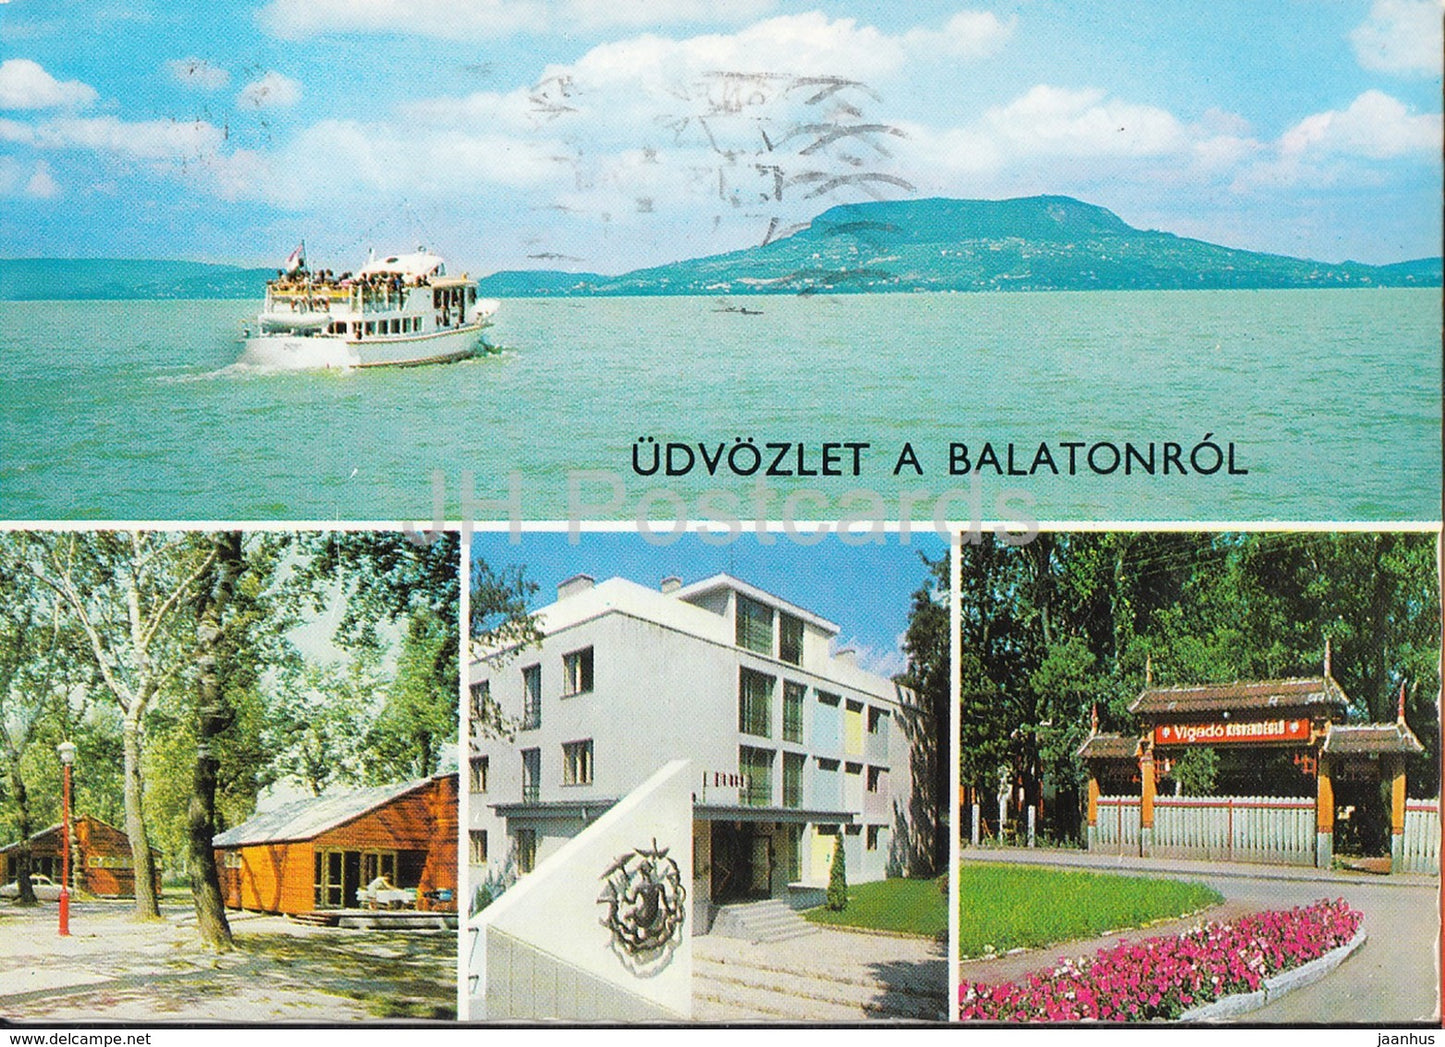 Greetings from the lake Balaton - boat - architecture - multiview - 1977 - Hungary - used - JH Postcards